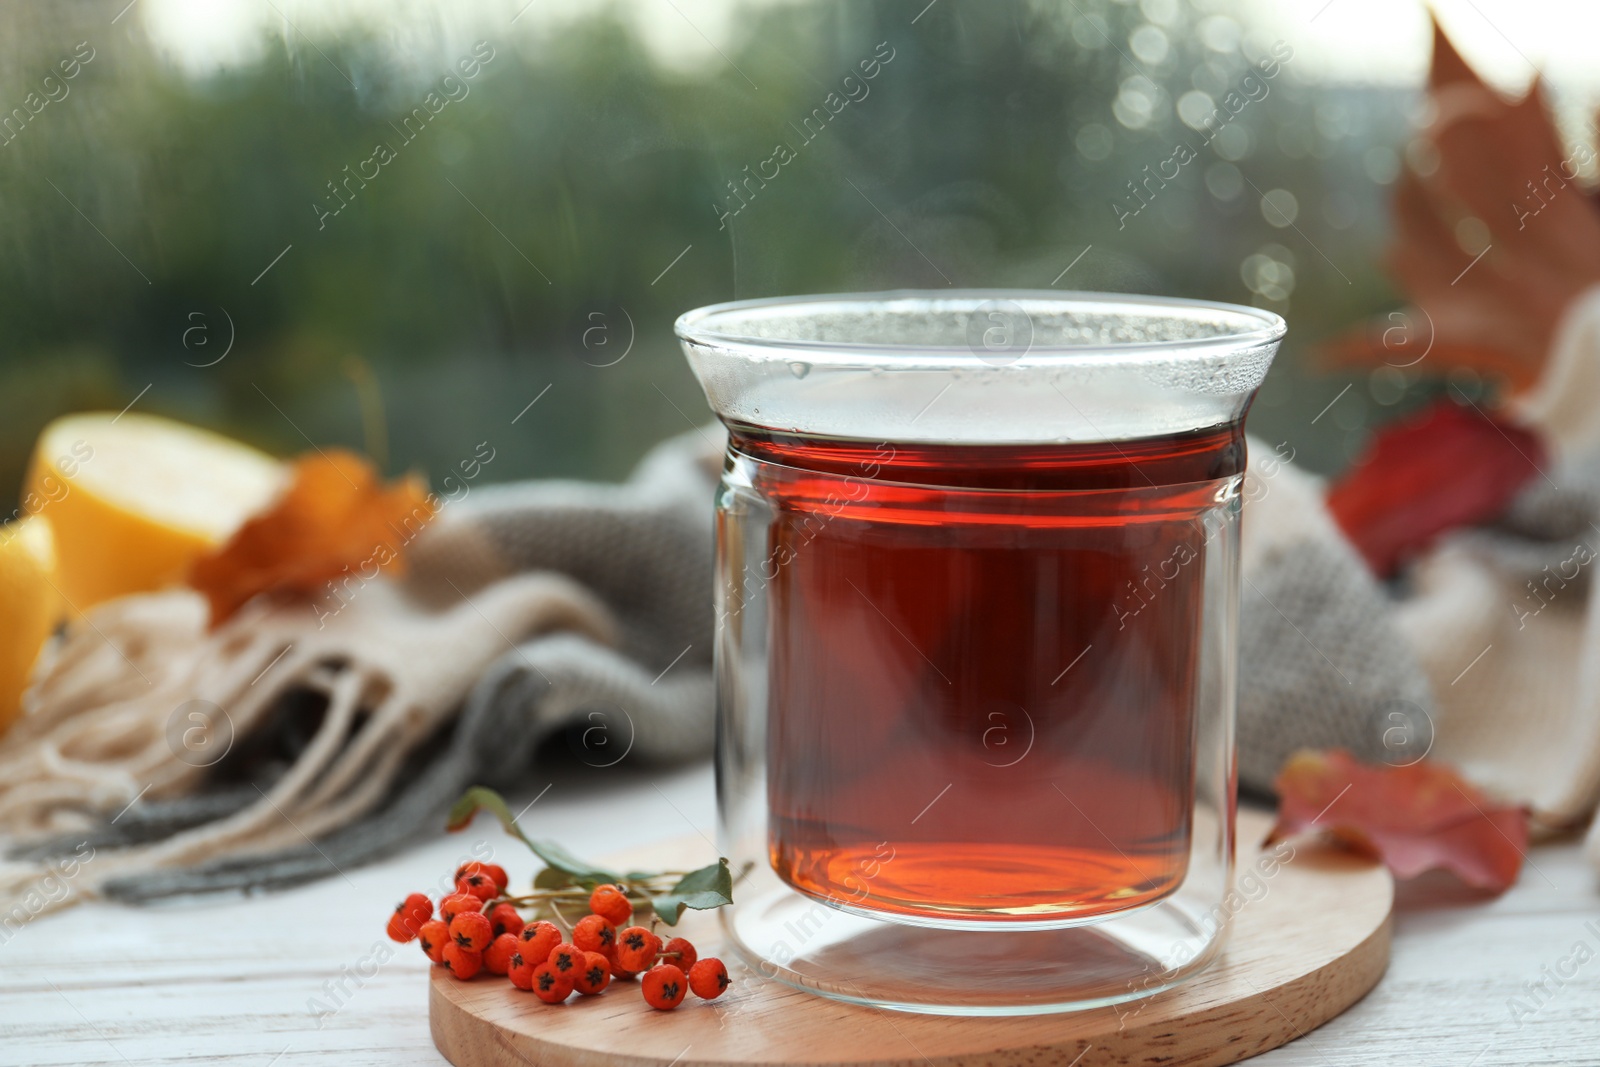 Photo of Cup of hot drink and scarf on window sill indoors. Cozy autumn atmosphere